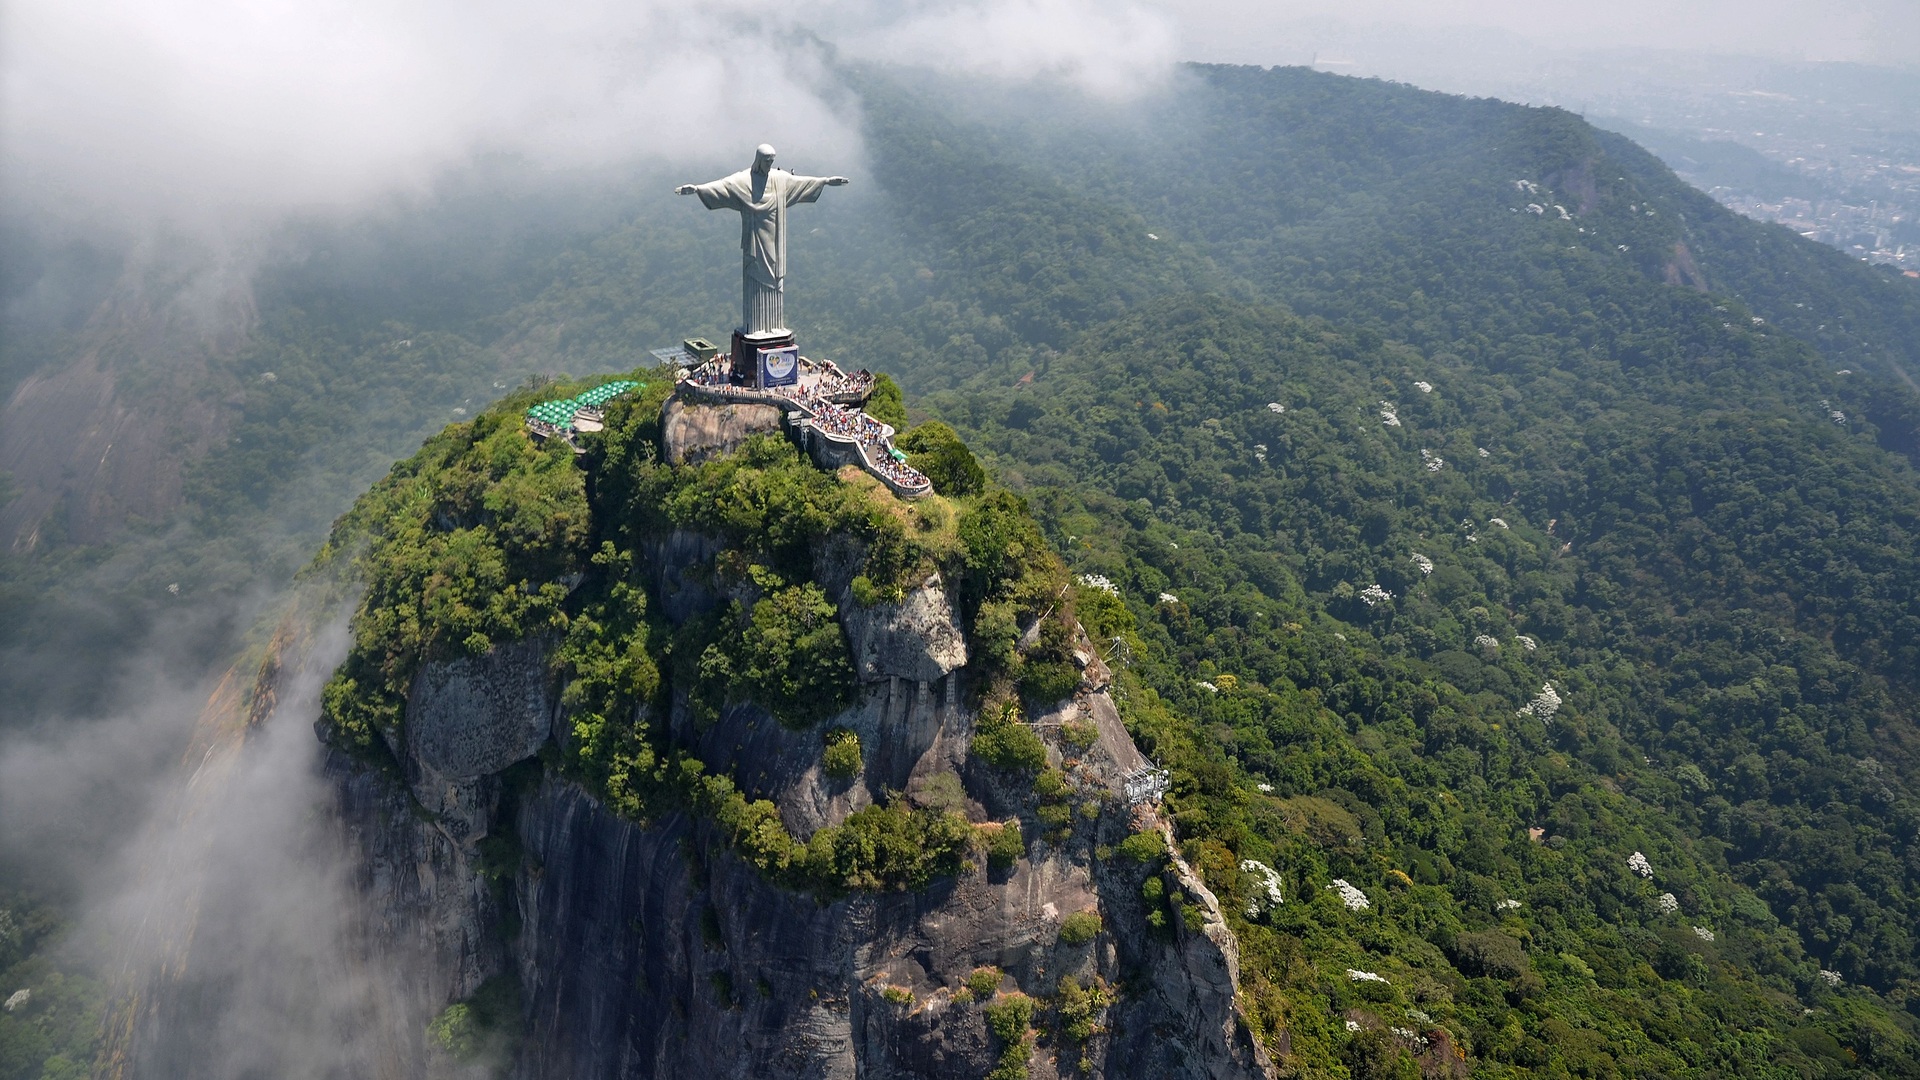 With Christ The Redeemer Pictures Places To Visit In Rio Wallpaper